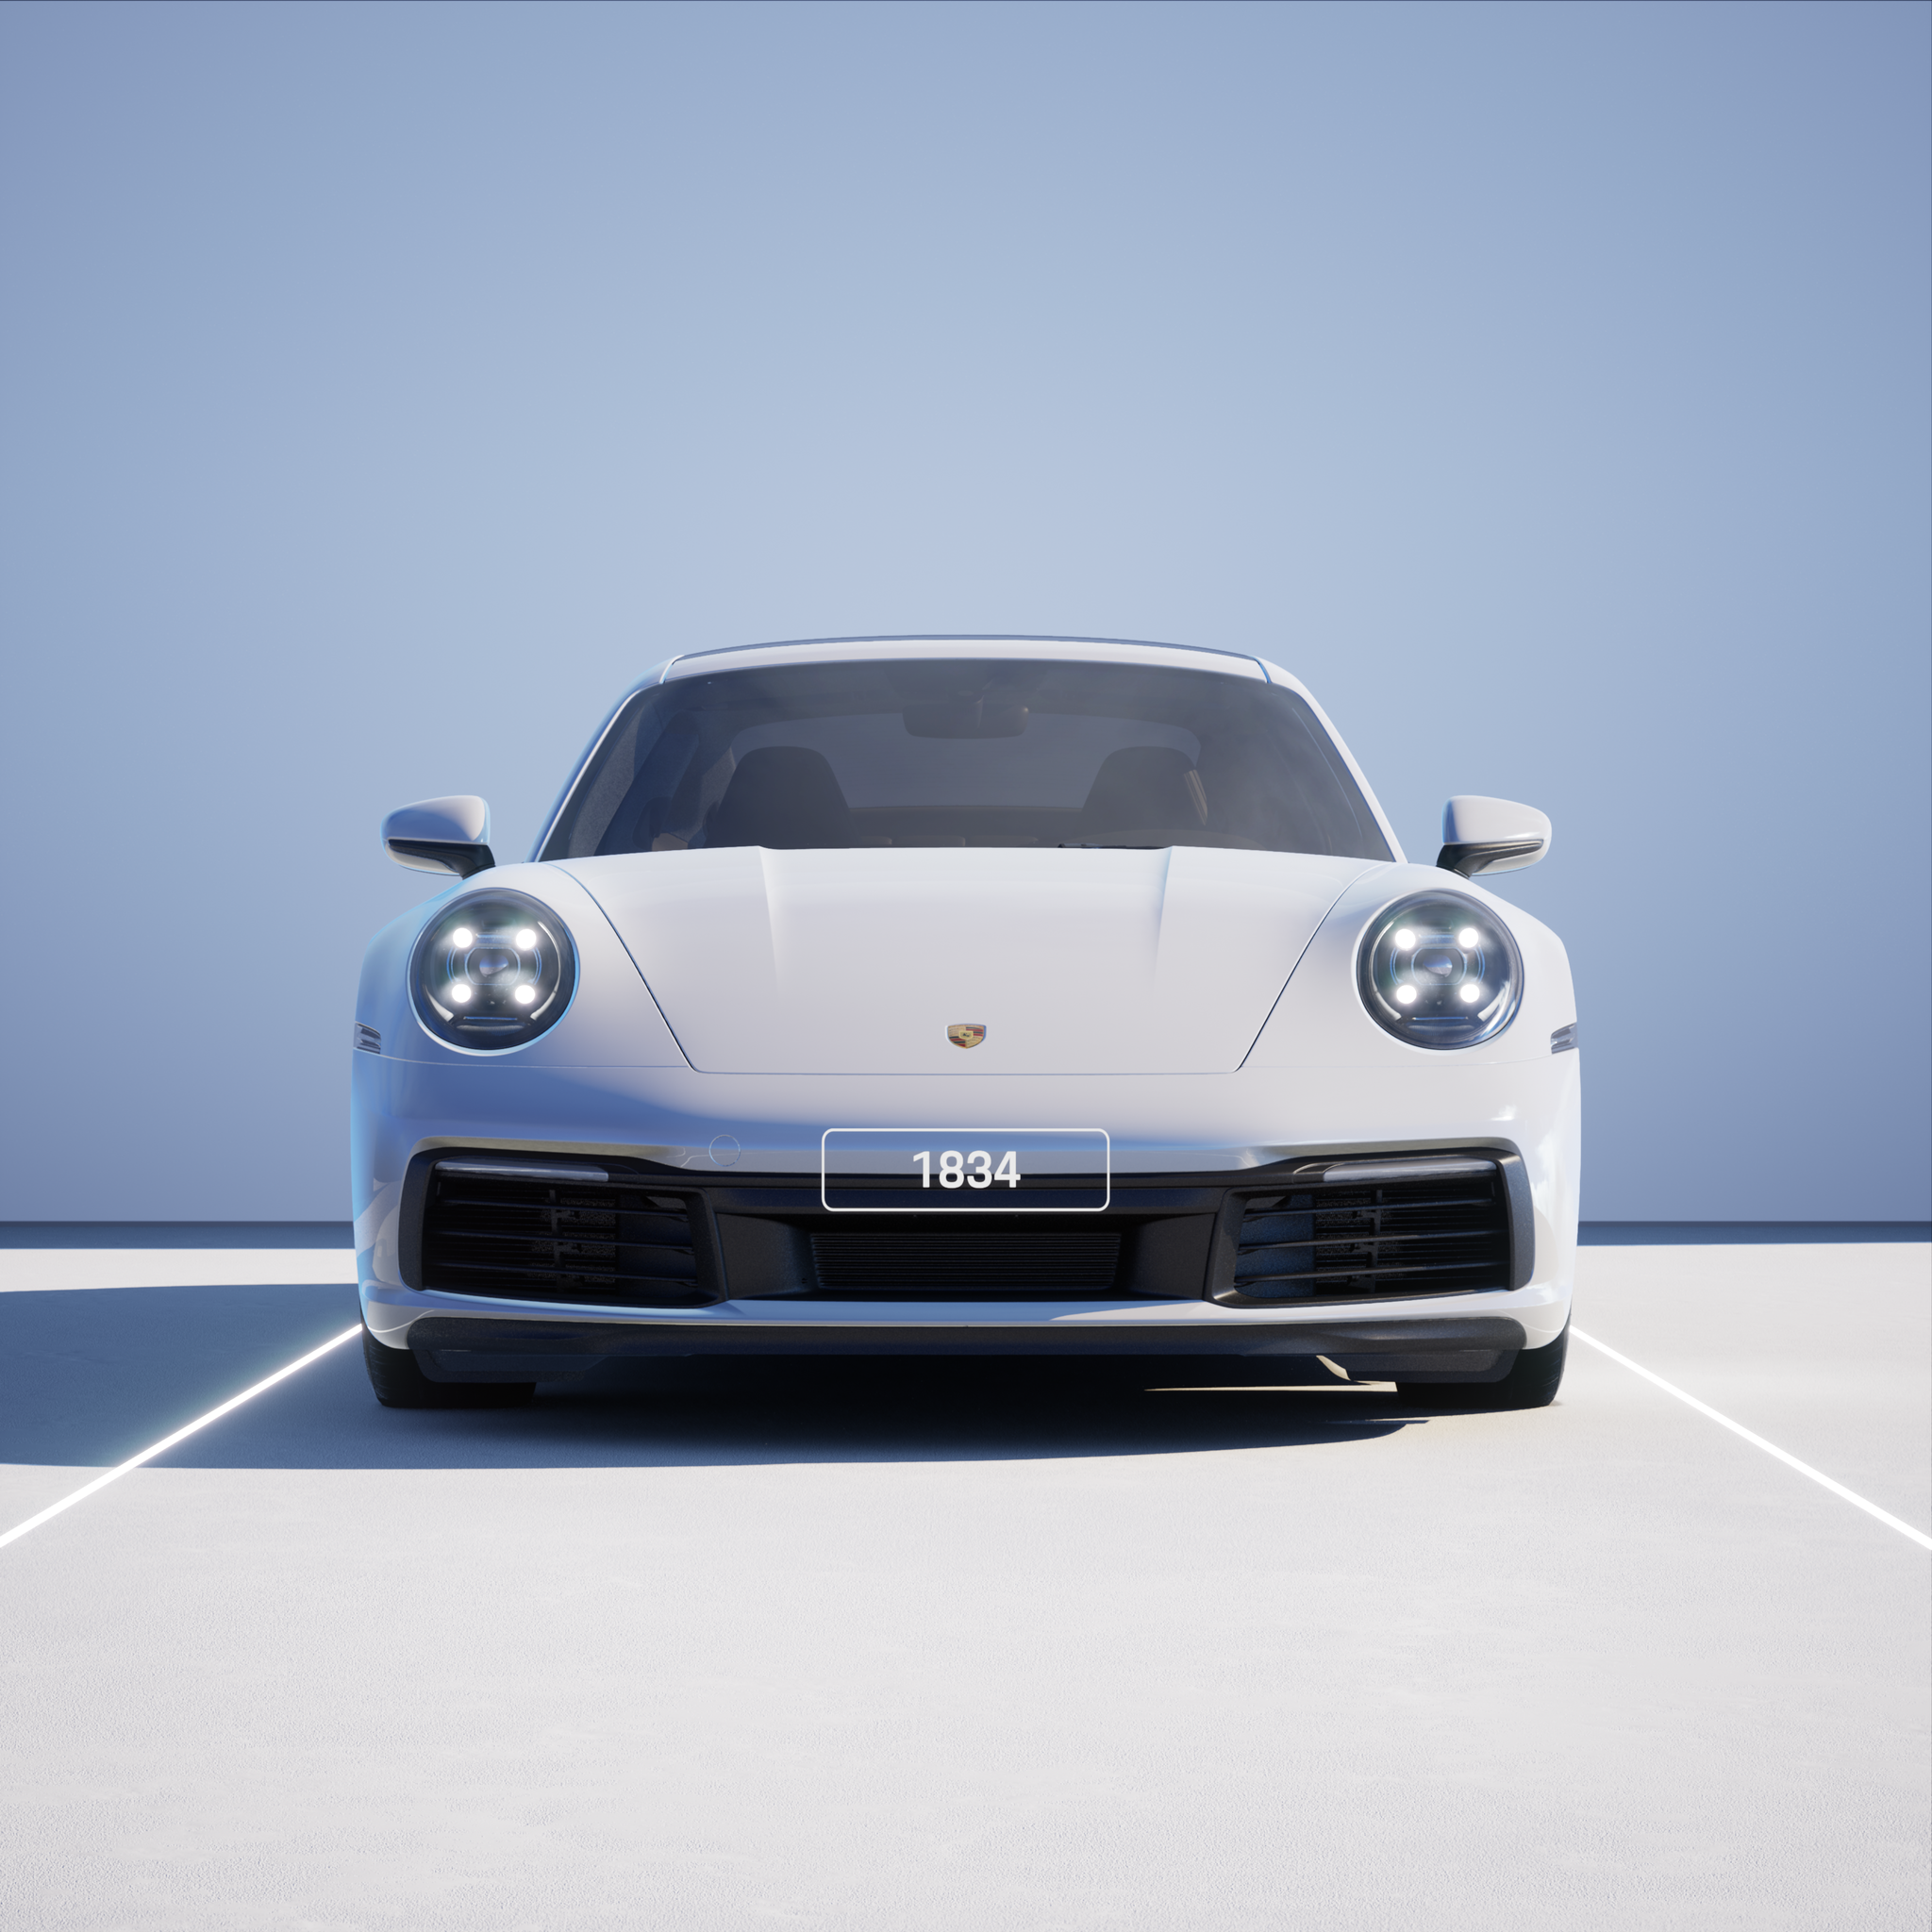 The PORSCHΞ 911 1834 image in phase